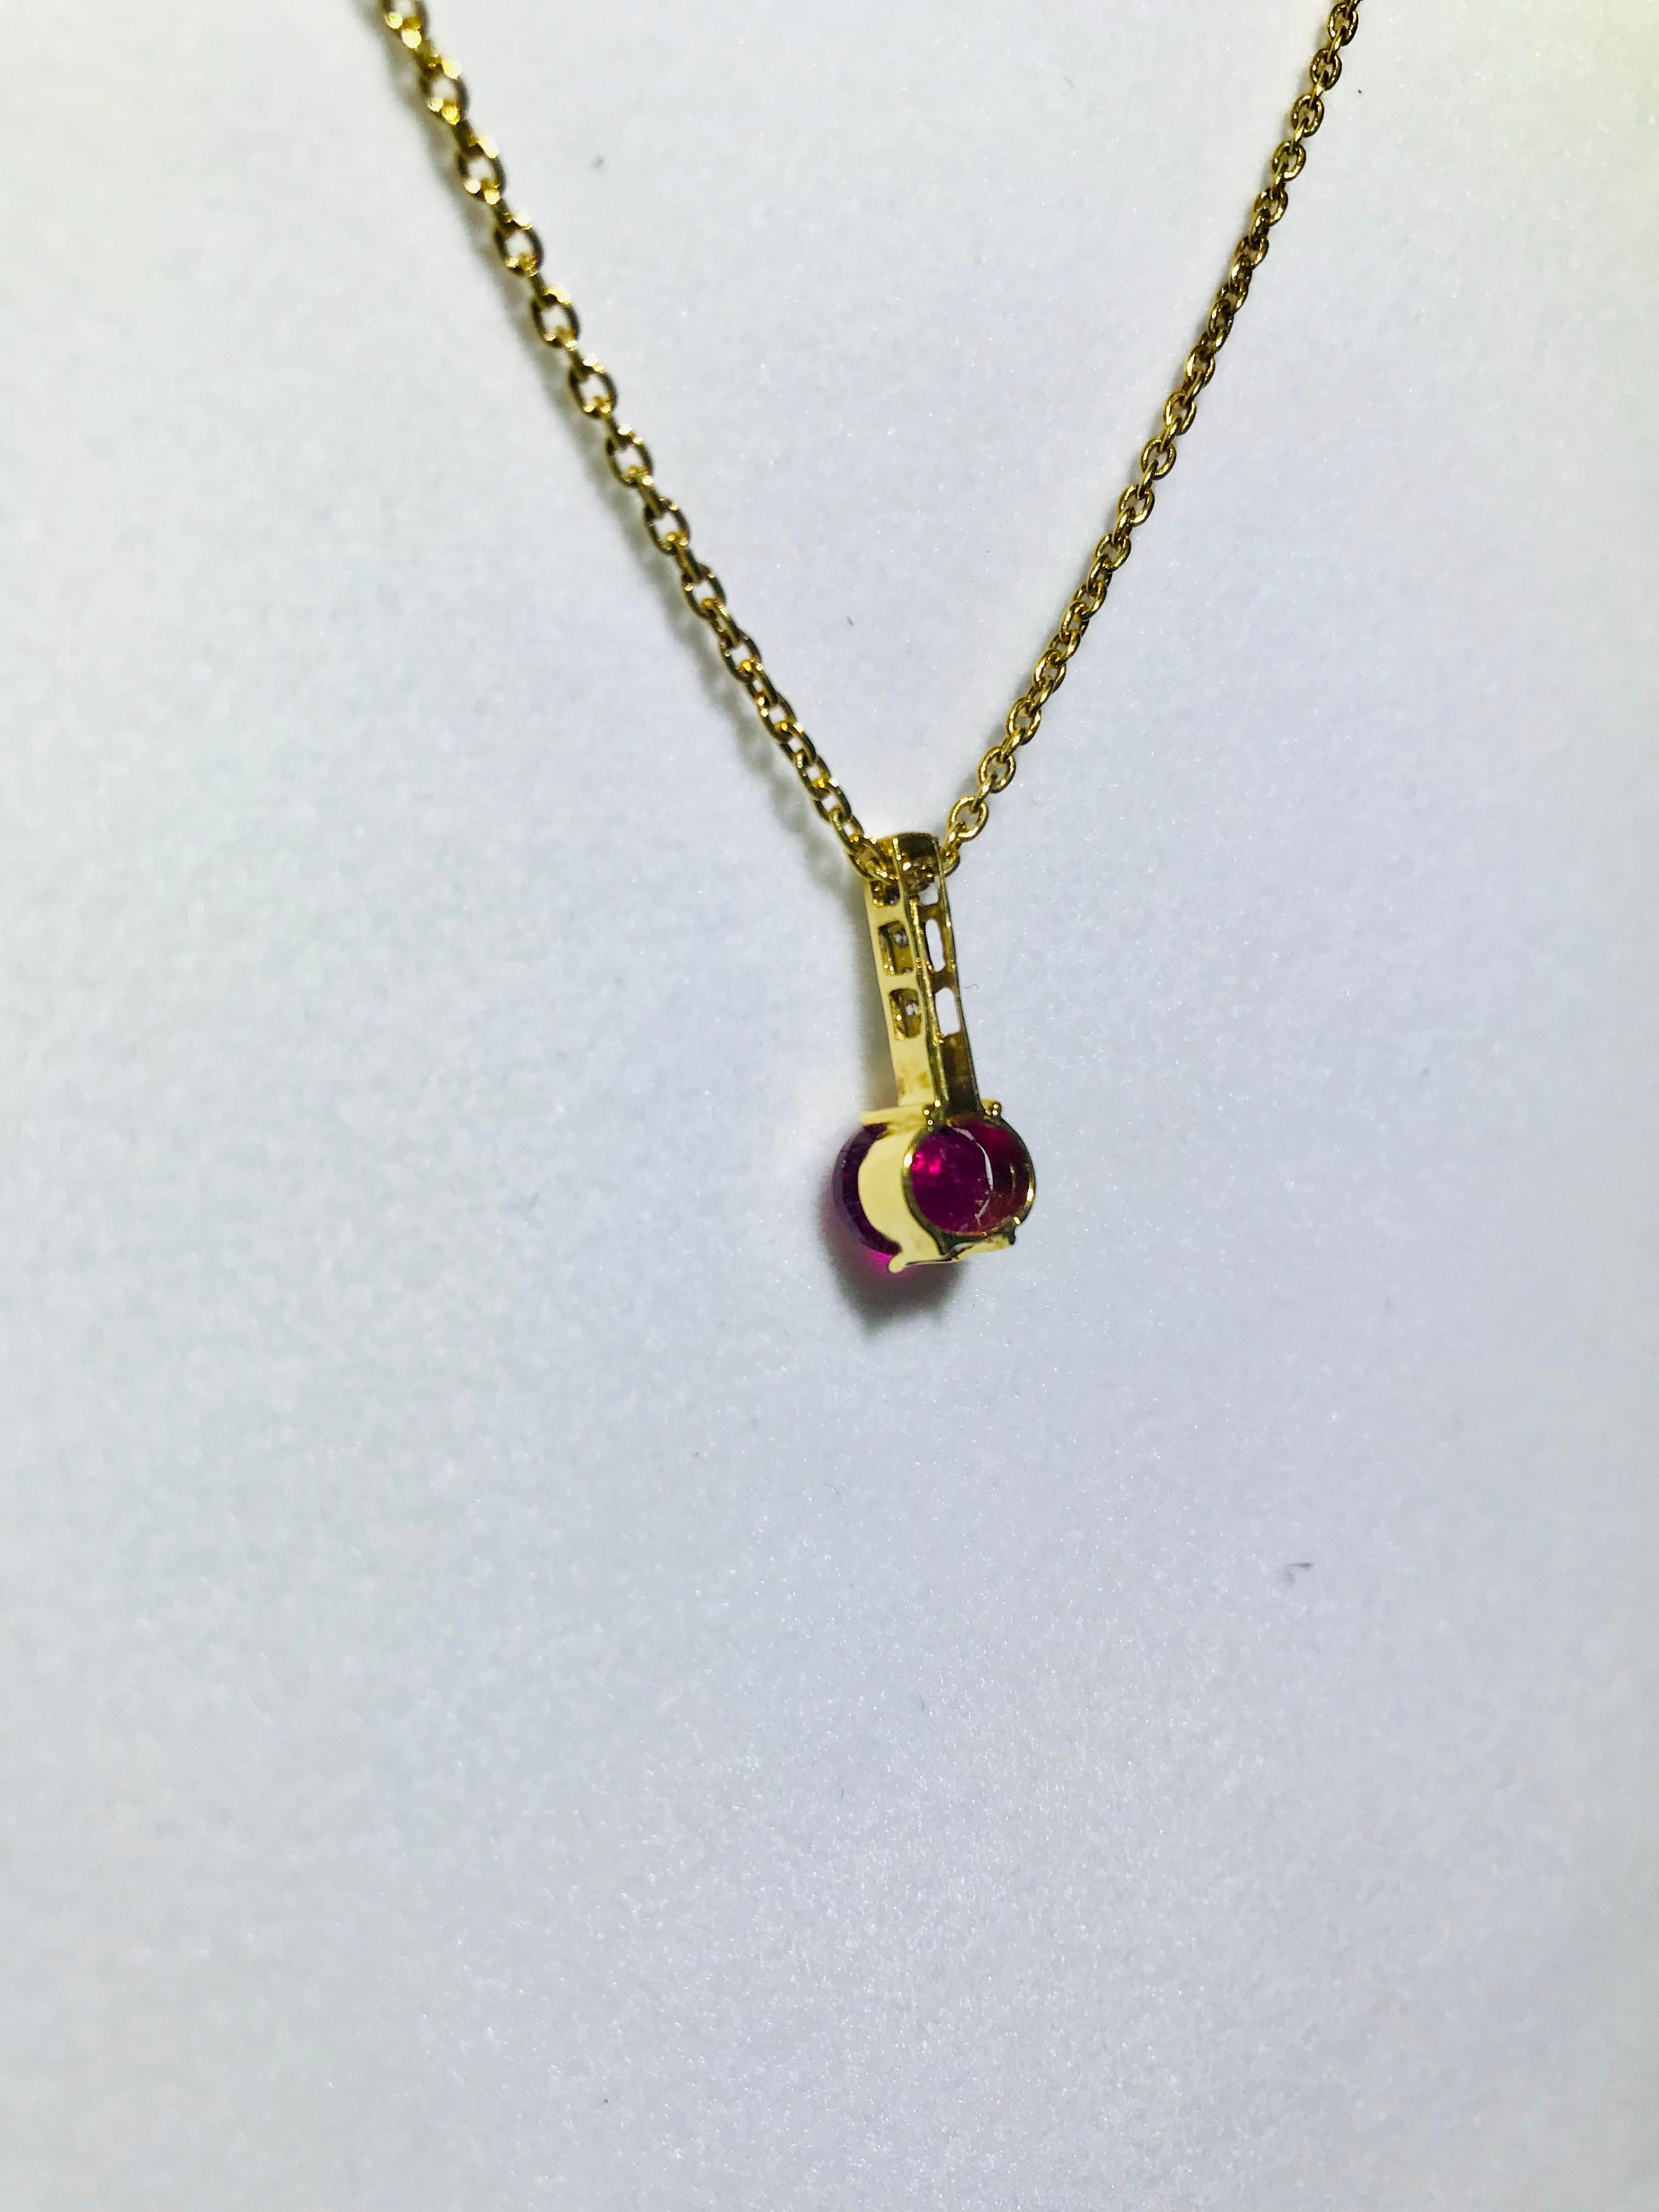 18K yellow gold pendant containing an oval faceted pink tourmaline weighing 1.33 carats and seven accent diamonds weighing combined 0.07 carat.